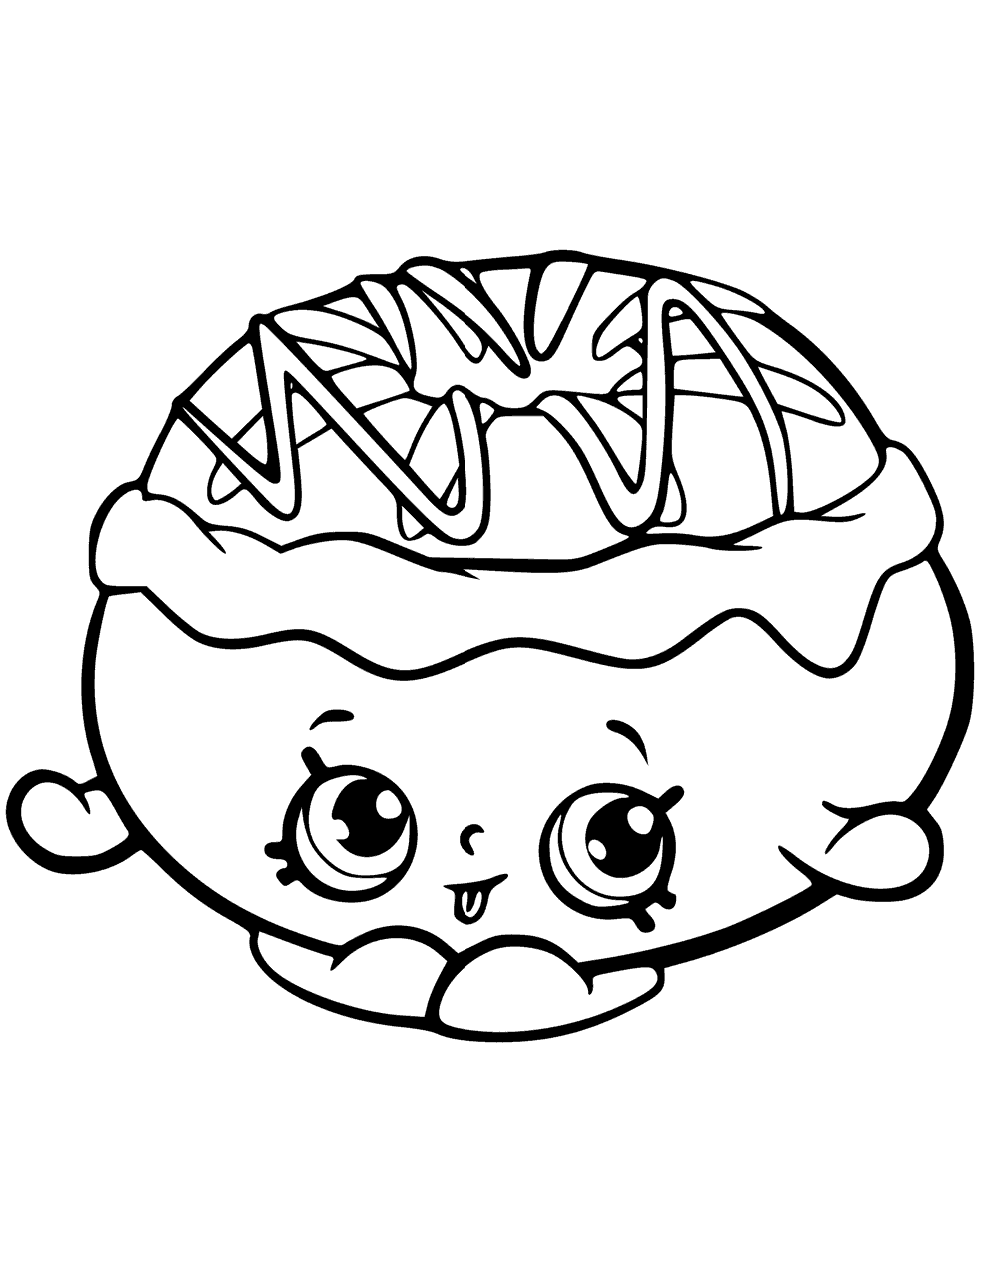 Cute Donut Shopkins Coloring Page